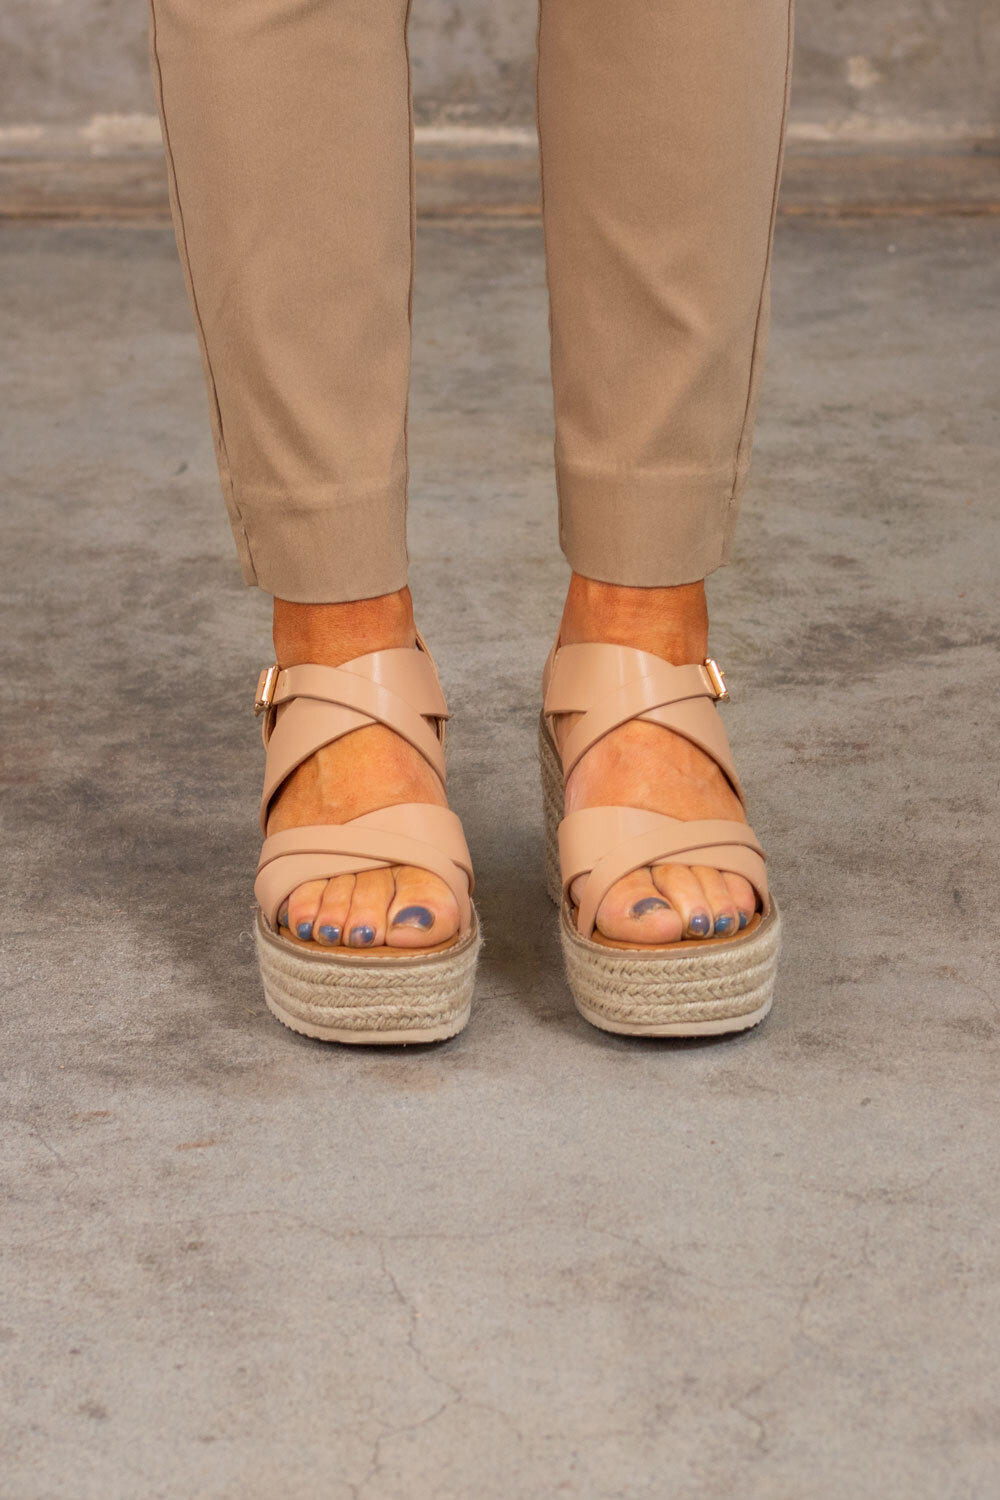 Sandals with Wedge Heel - Taupe